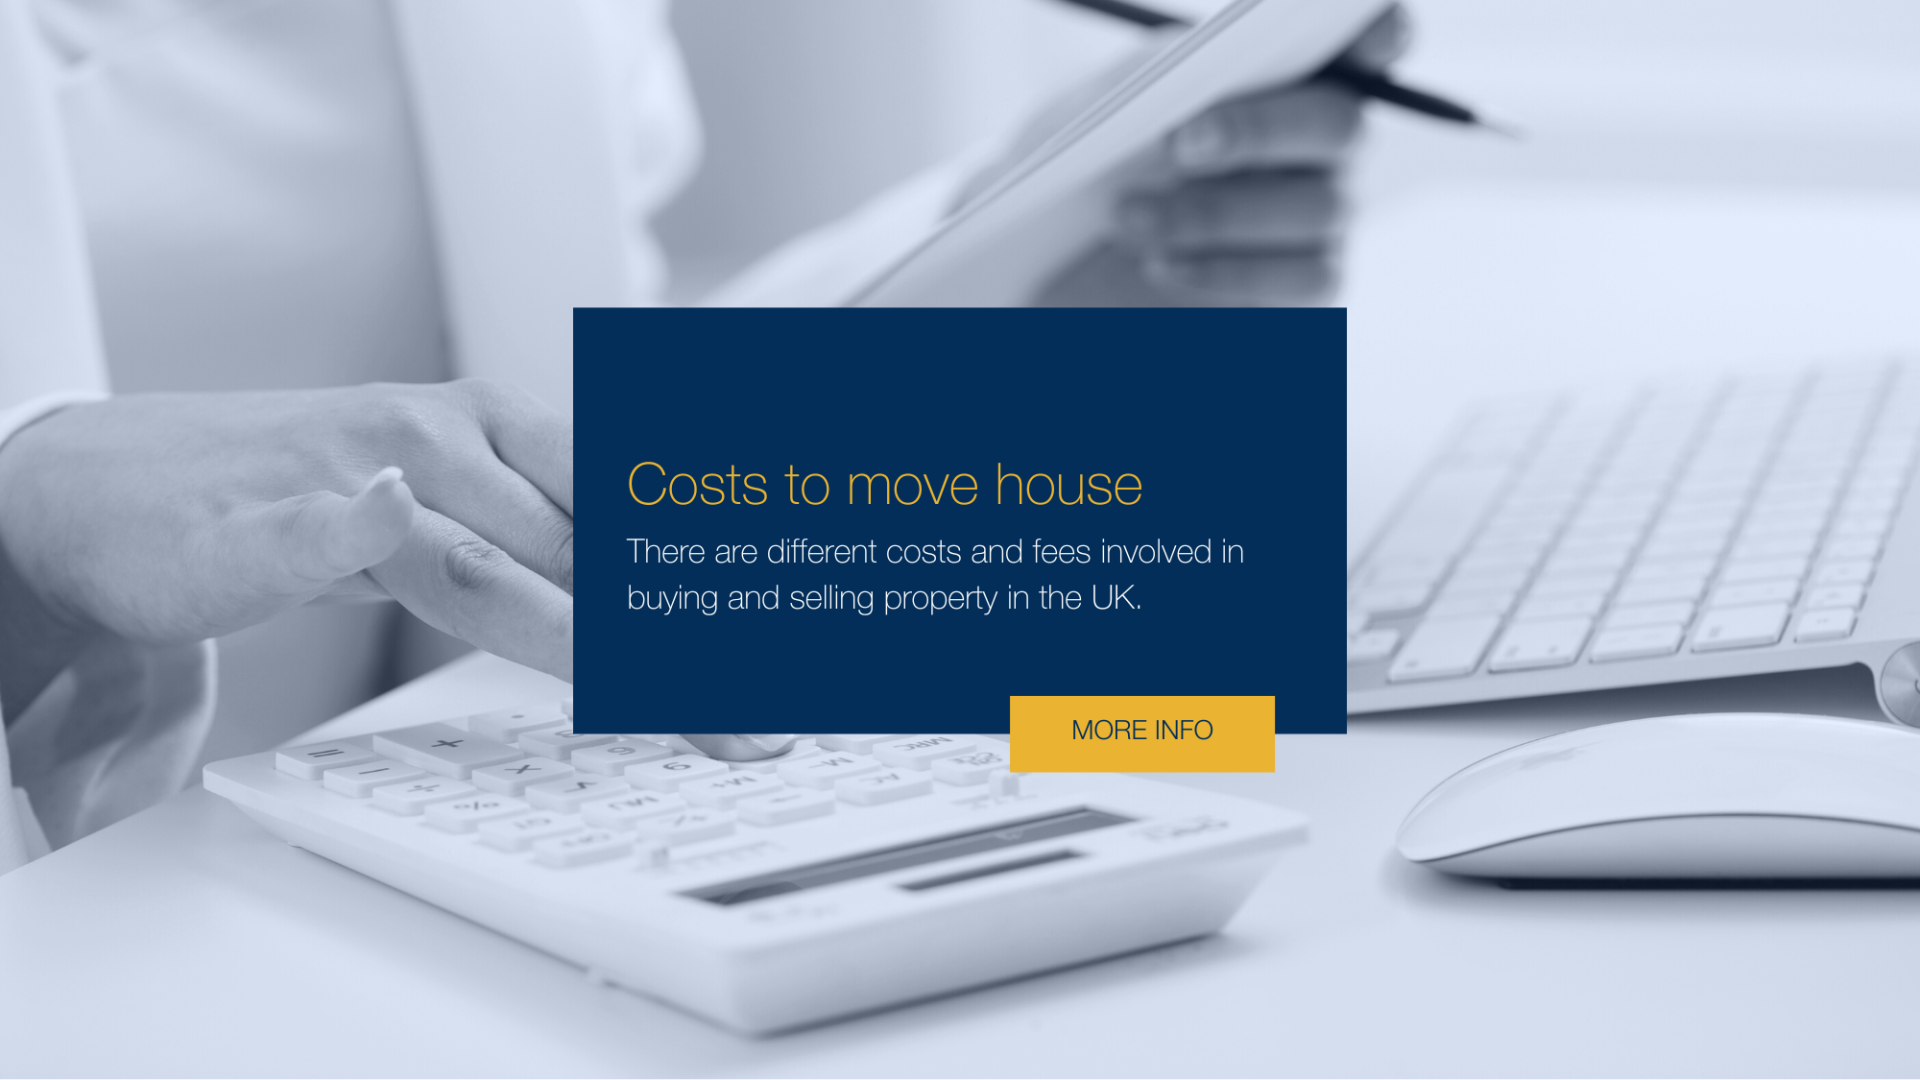 Costs to move house